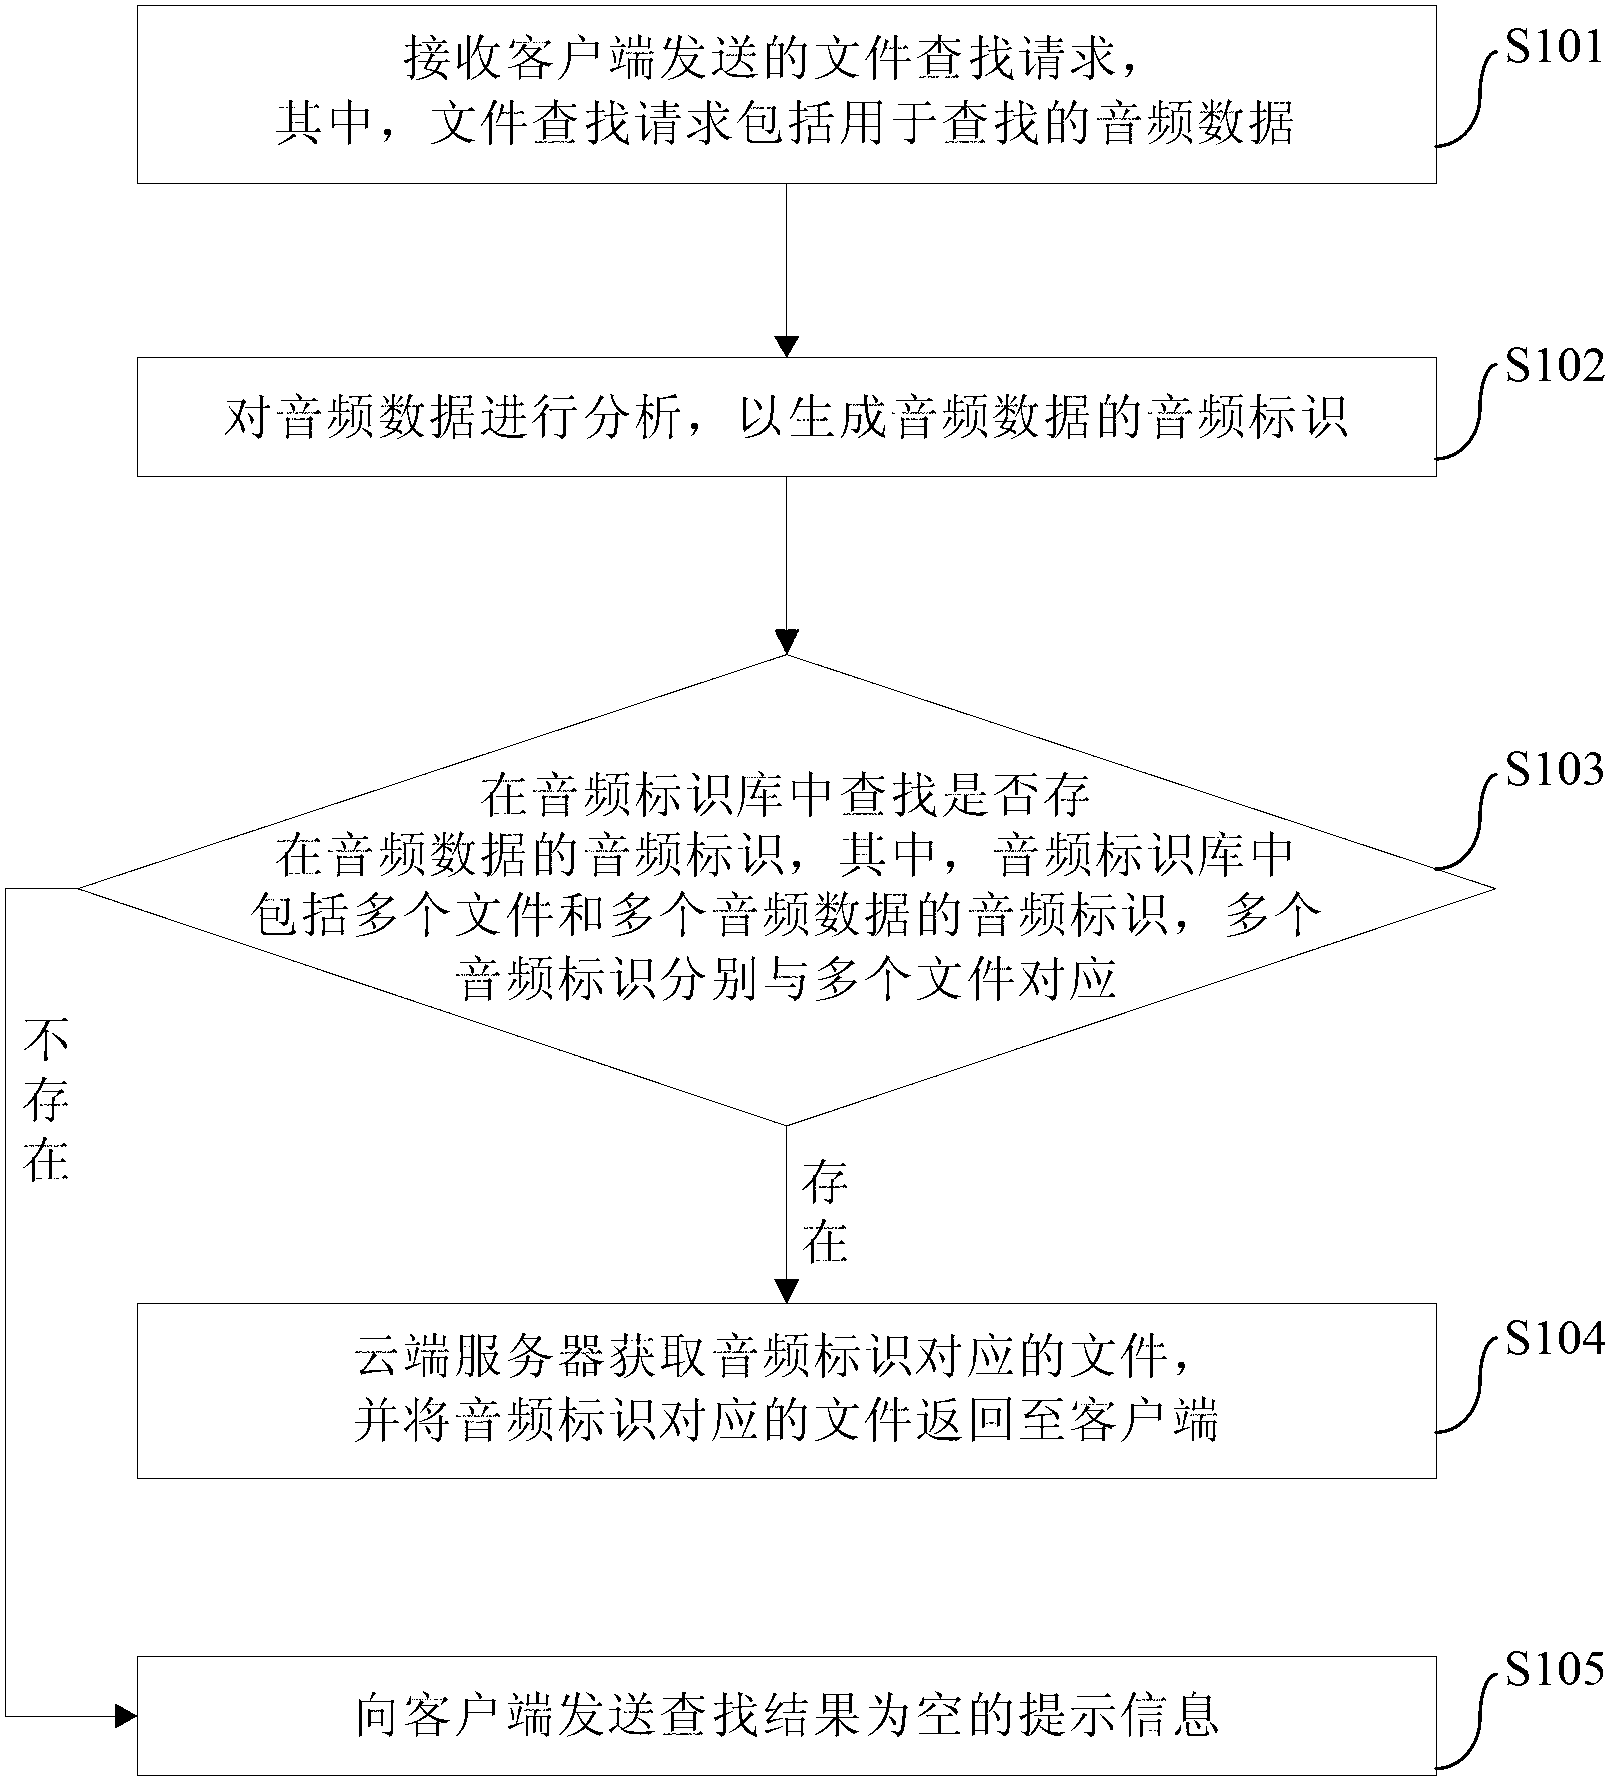 Voice-data-based file searching method, voice-data-based file device and voice-data-based file system